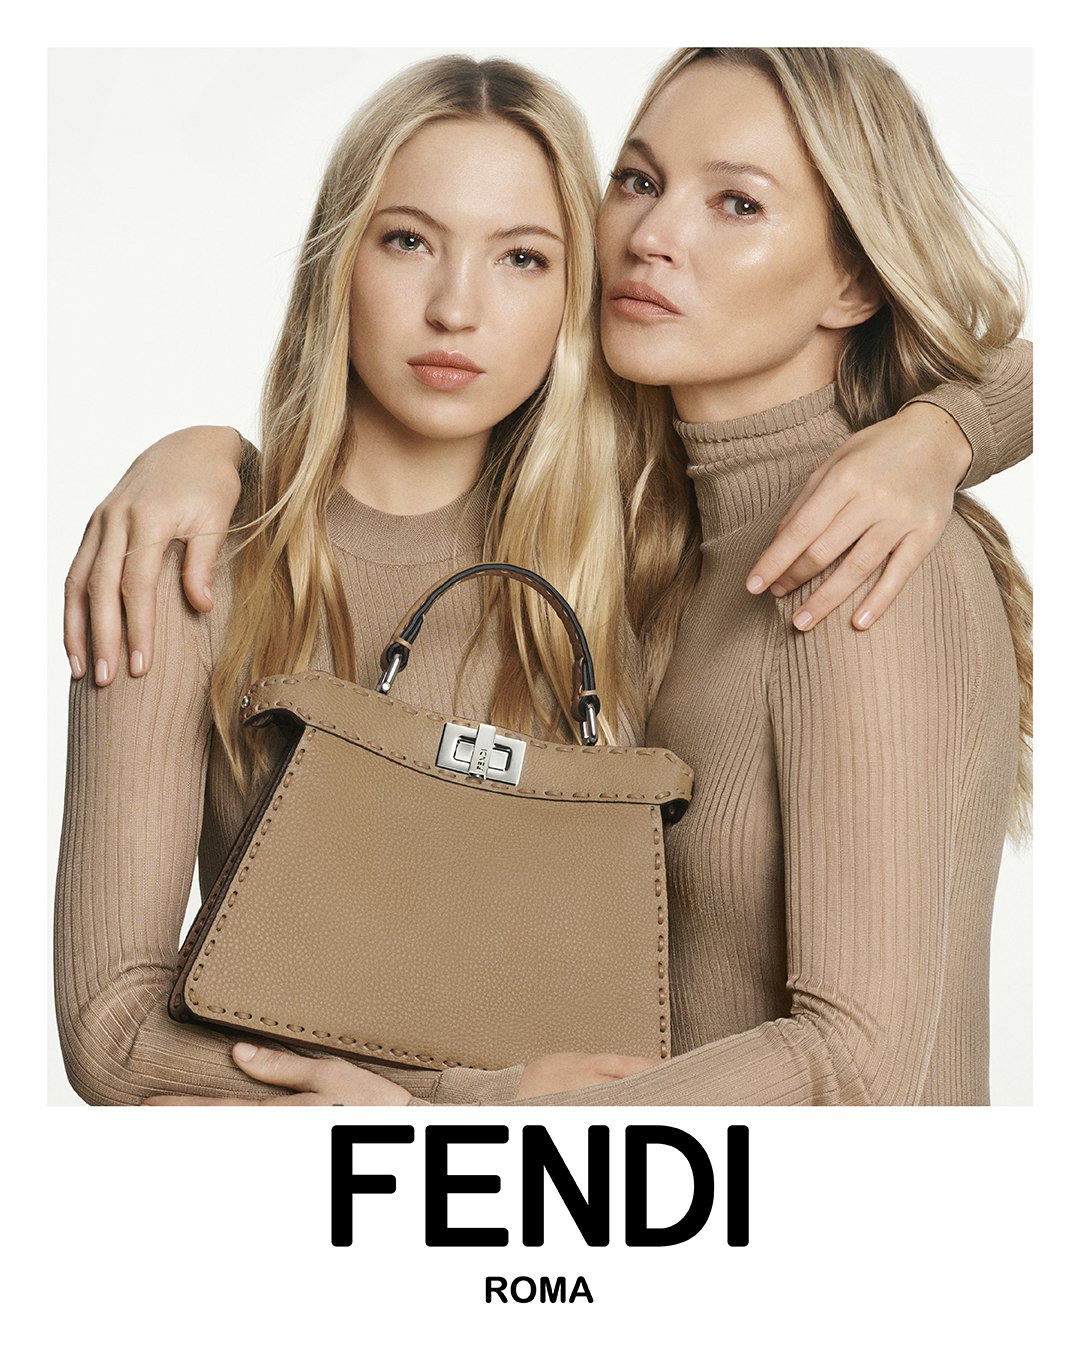 The FENDI woman contains multitudes. So does her Peekaboo.